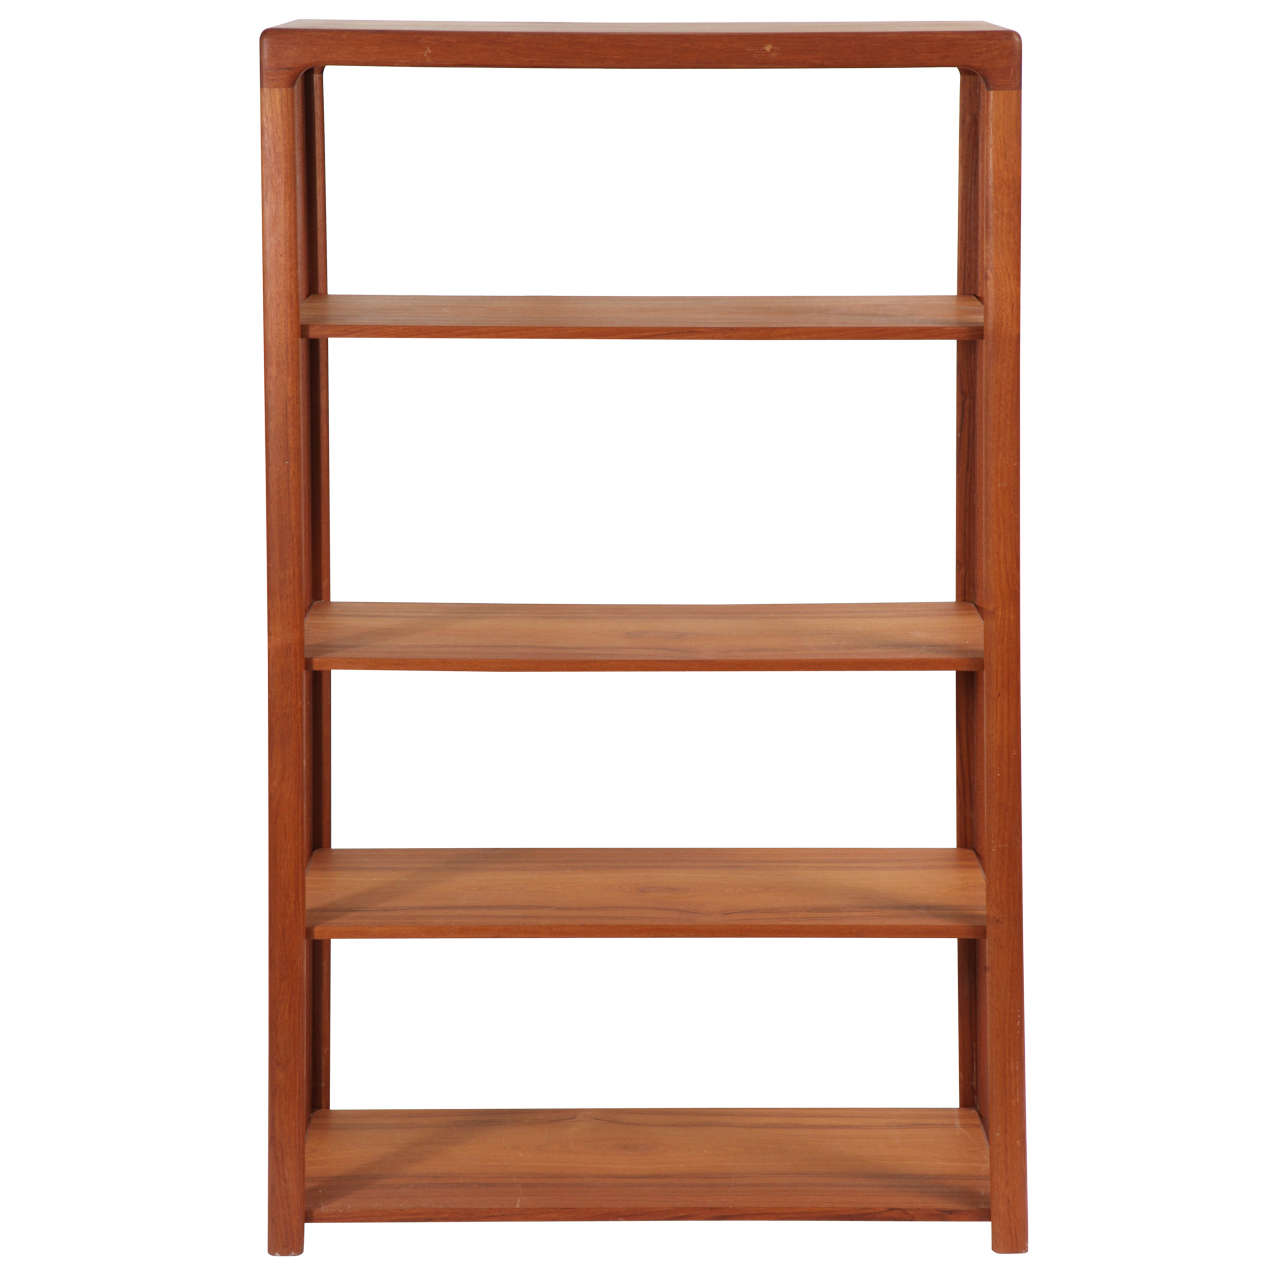 A Danish solid teak open bookshelf, circa 1950s, very nicely constructed with rounded corners. Two adjustable shelves, center, top and bottom fixed shelves.